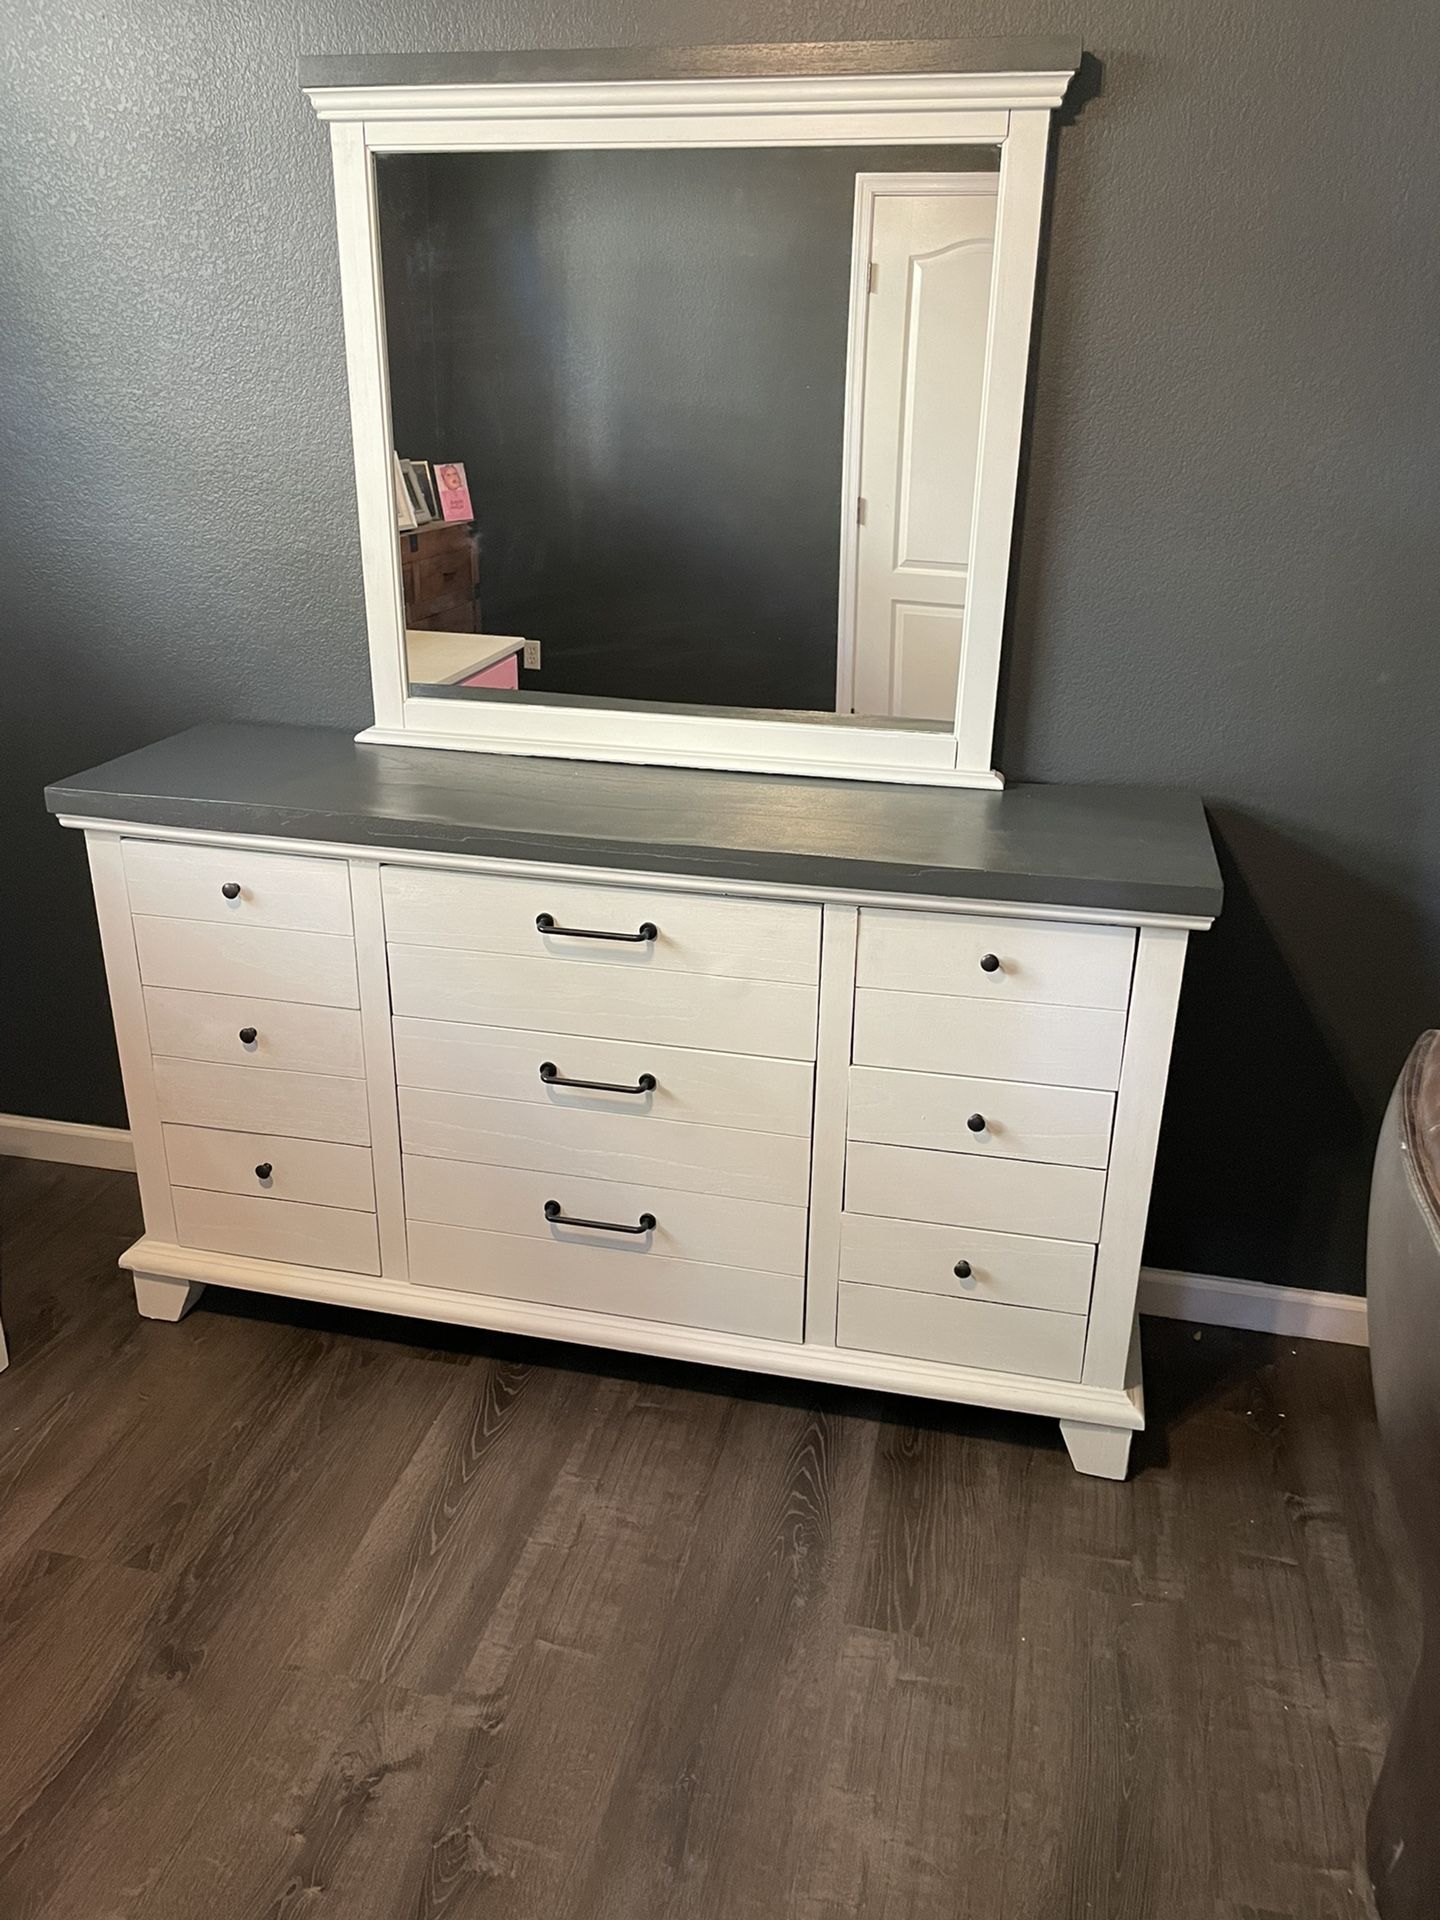 Reconditioned 9 Drawer Dresser With Mirror 